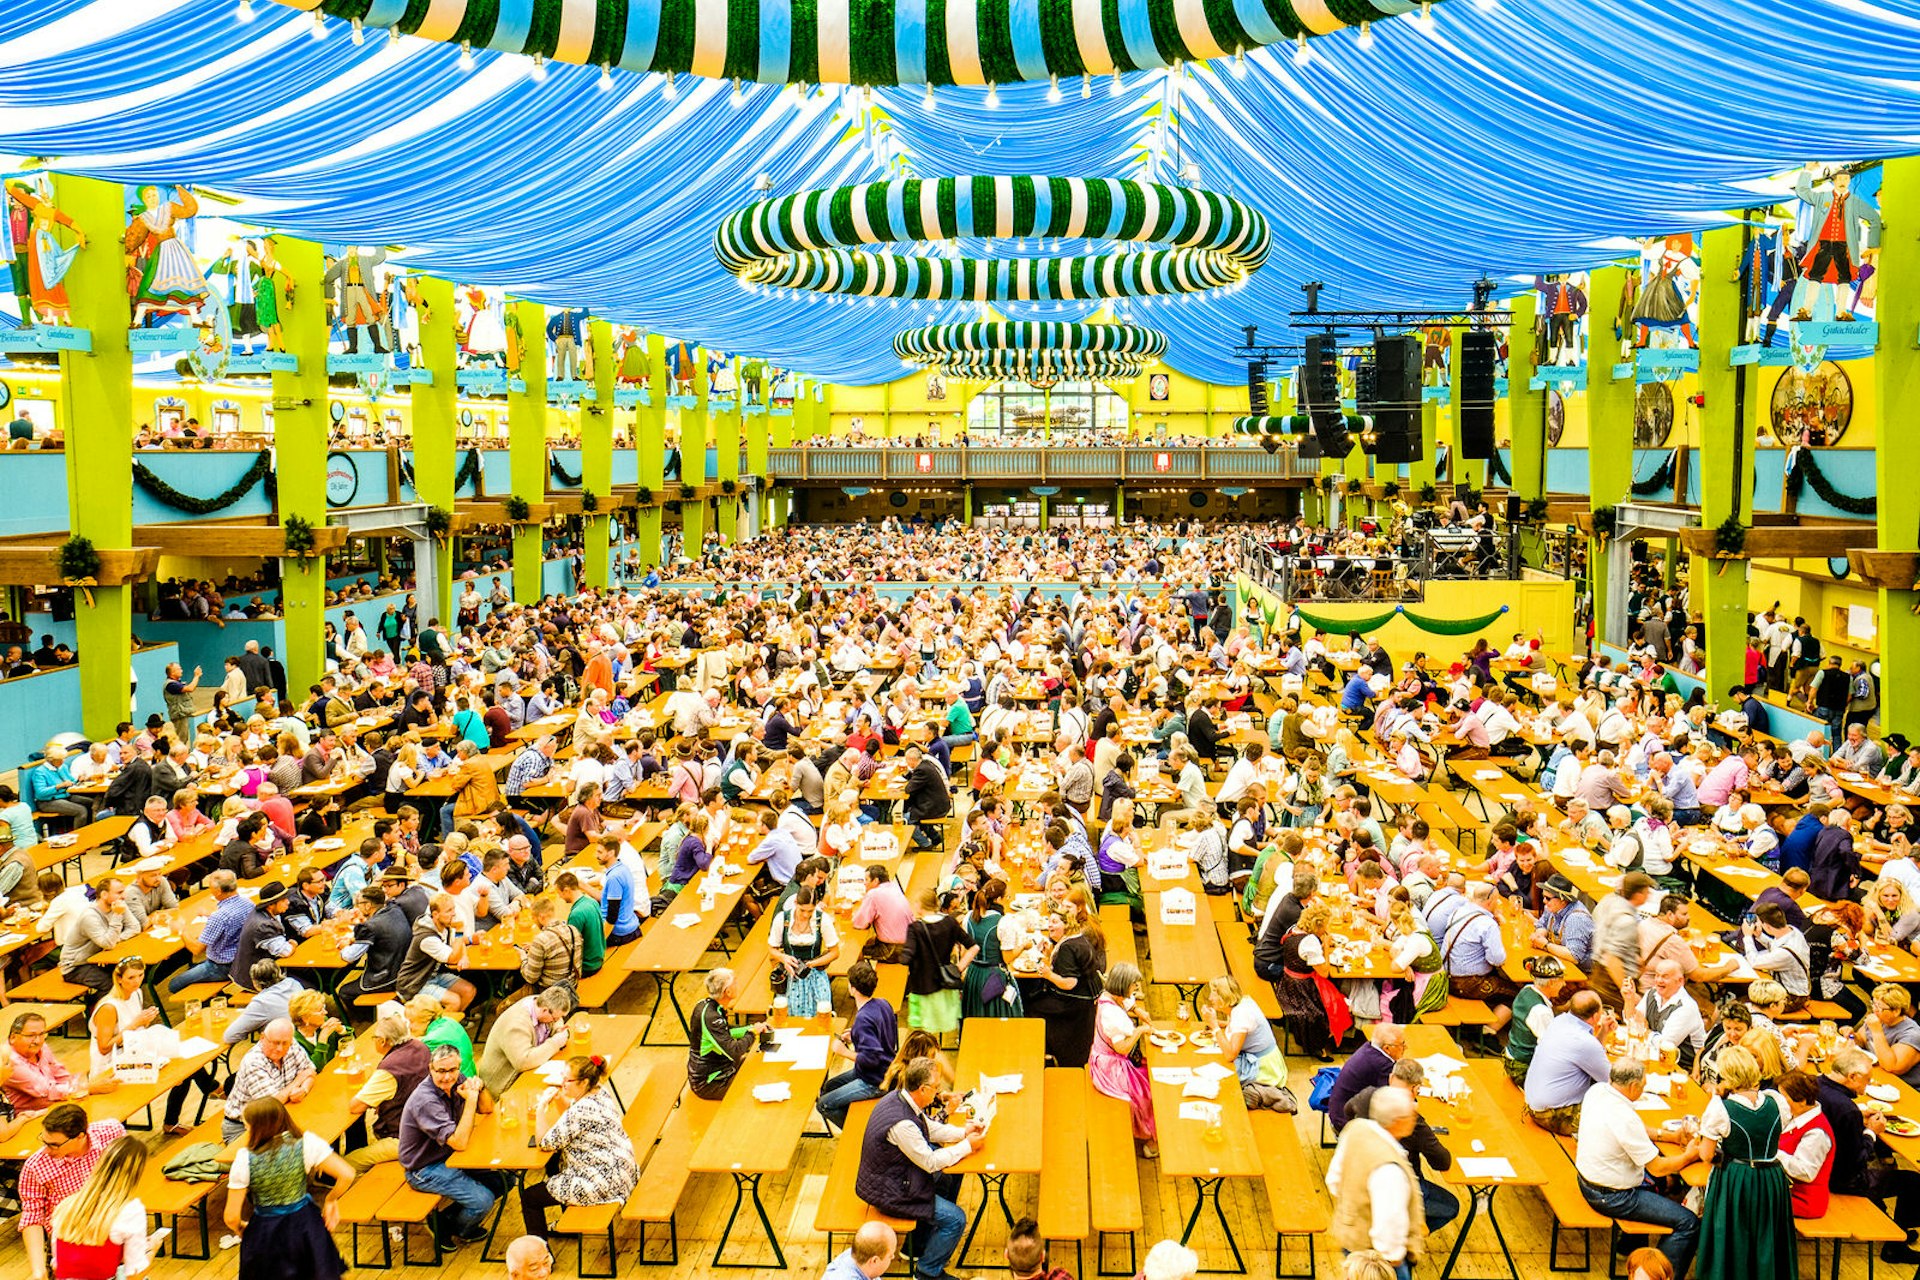 People in the 'Spaten' beer tent at Oktoberfest in Munich. The huge tent, that houses hundreds of tables, has a colourful blue ceiling and striped decorations.